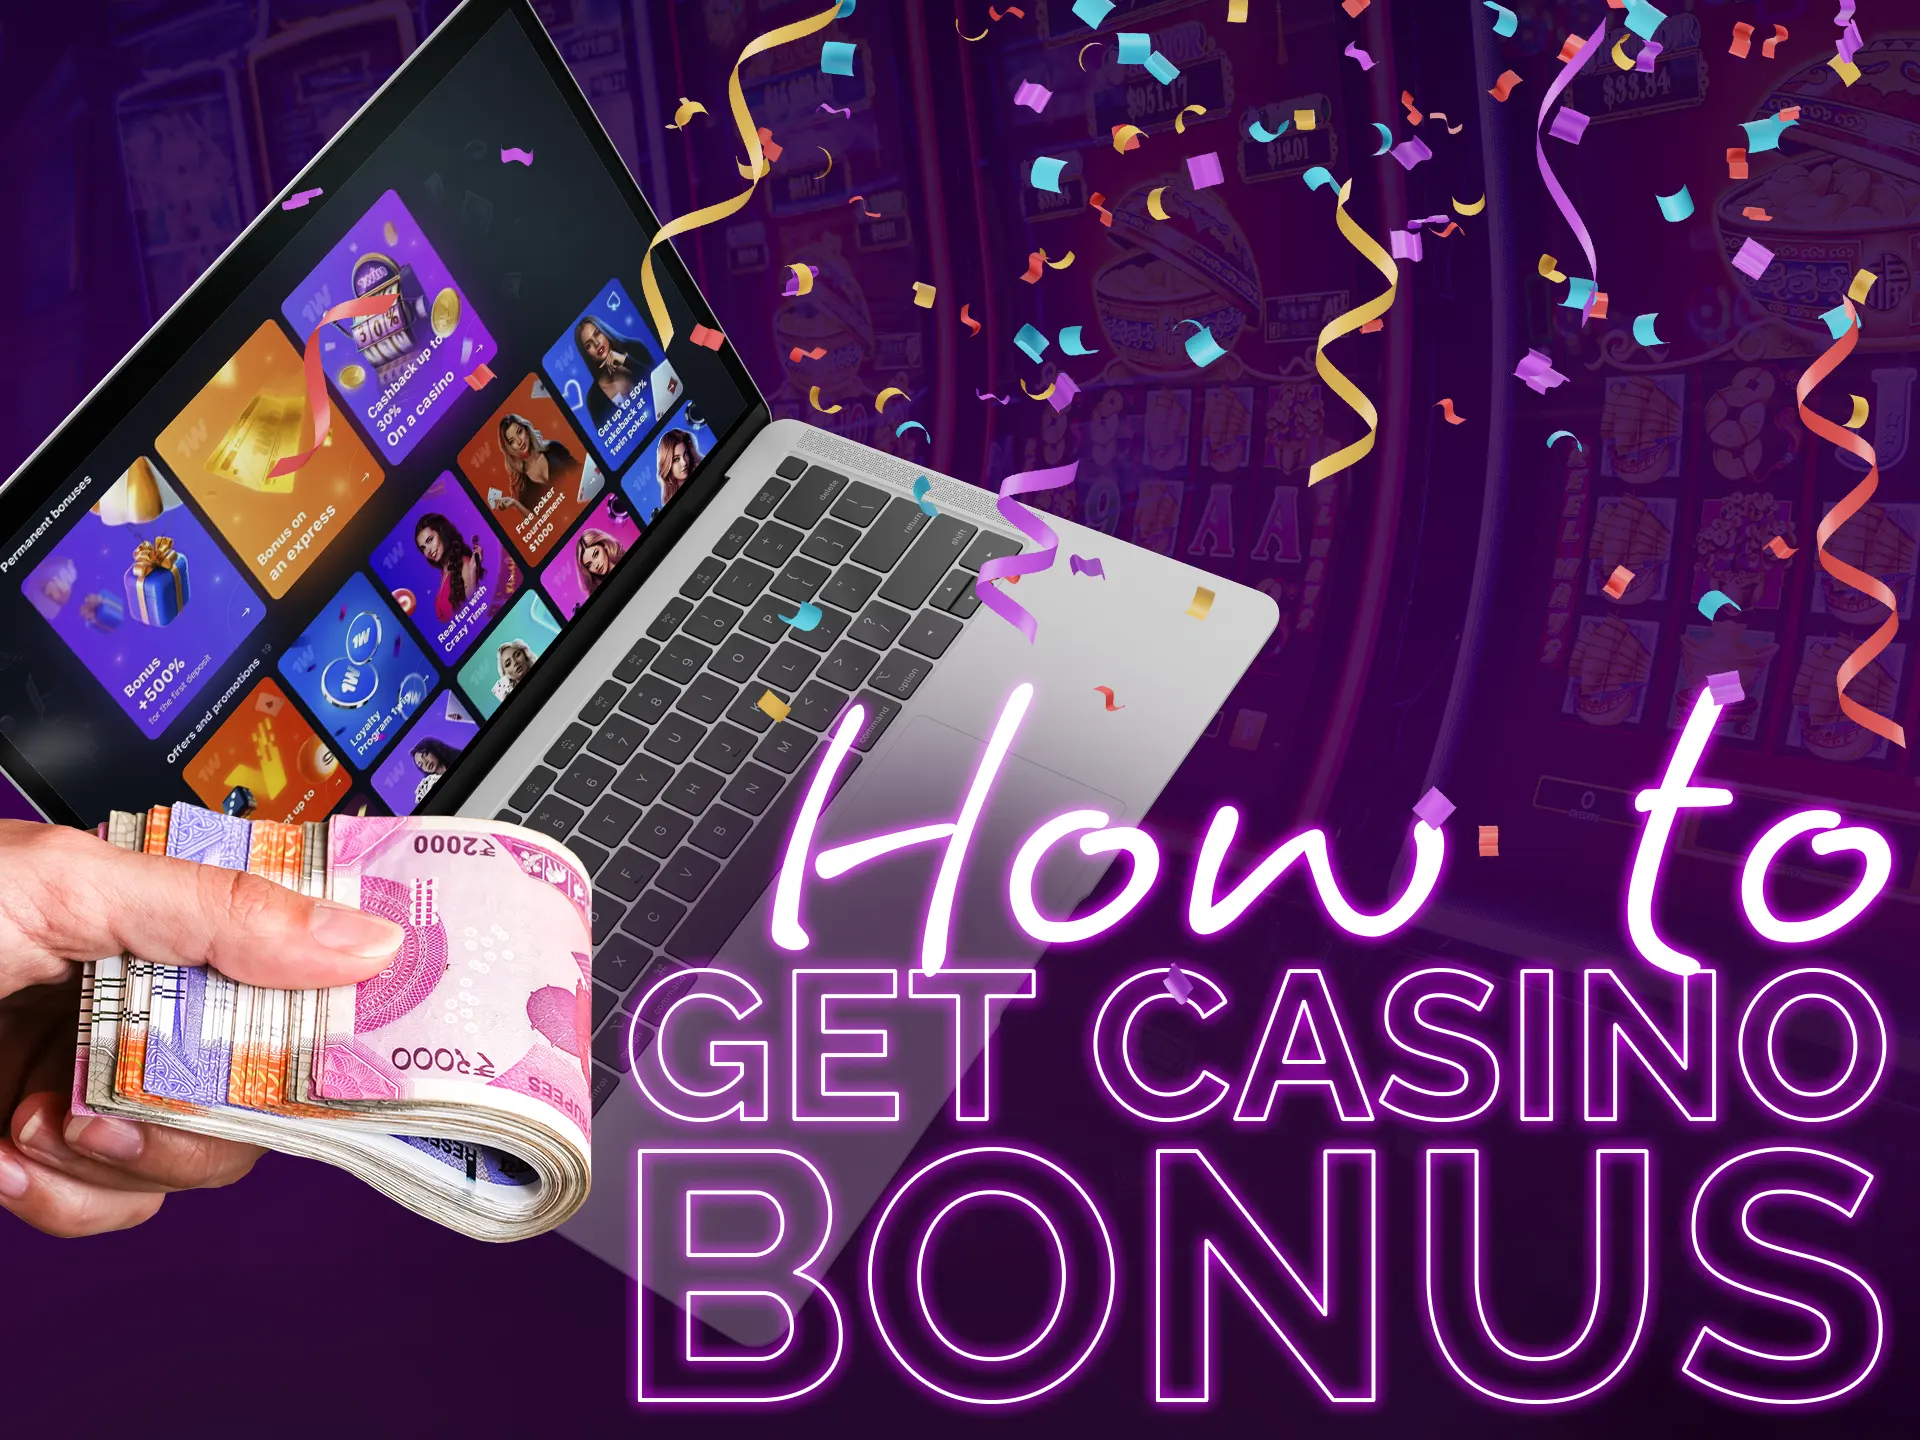 Claim the casino bonus, and play eligible games, fulfill wagering rules, and withdraw your winnings.